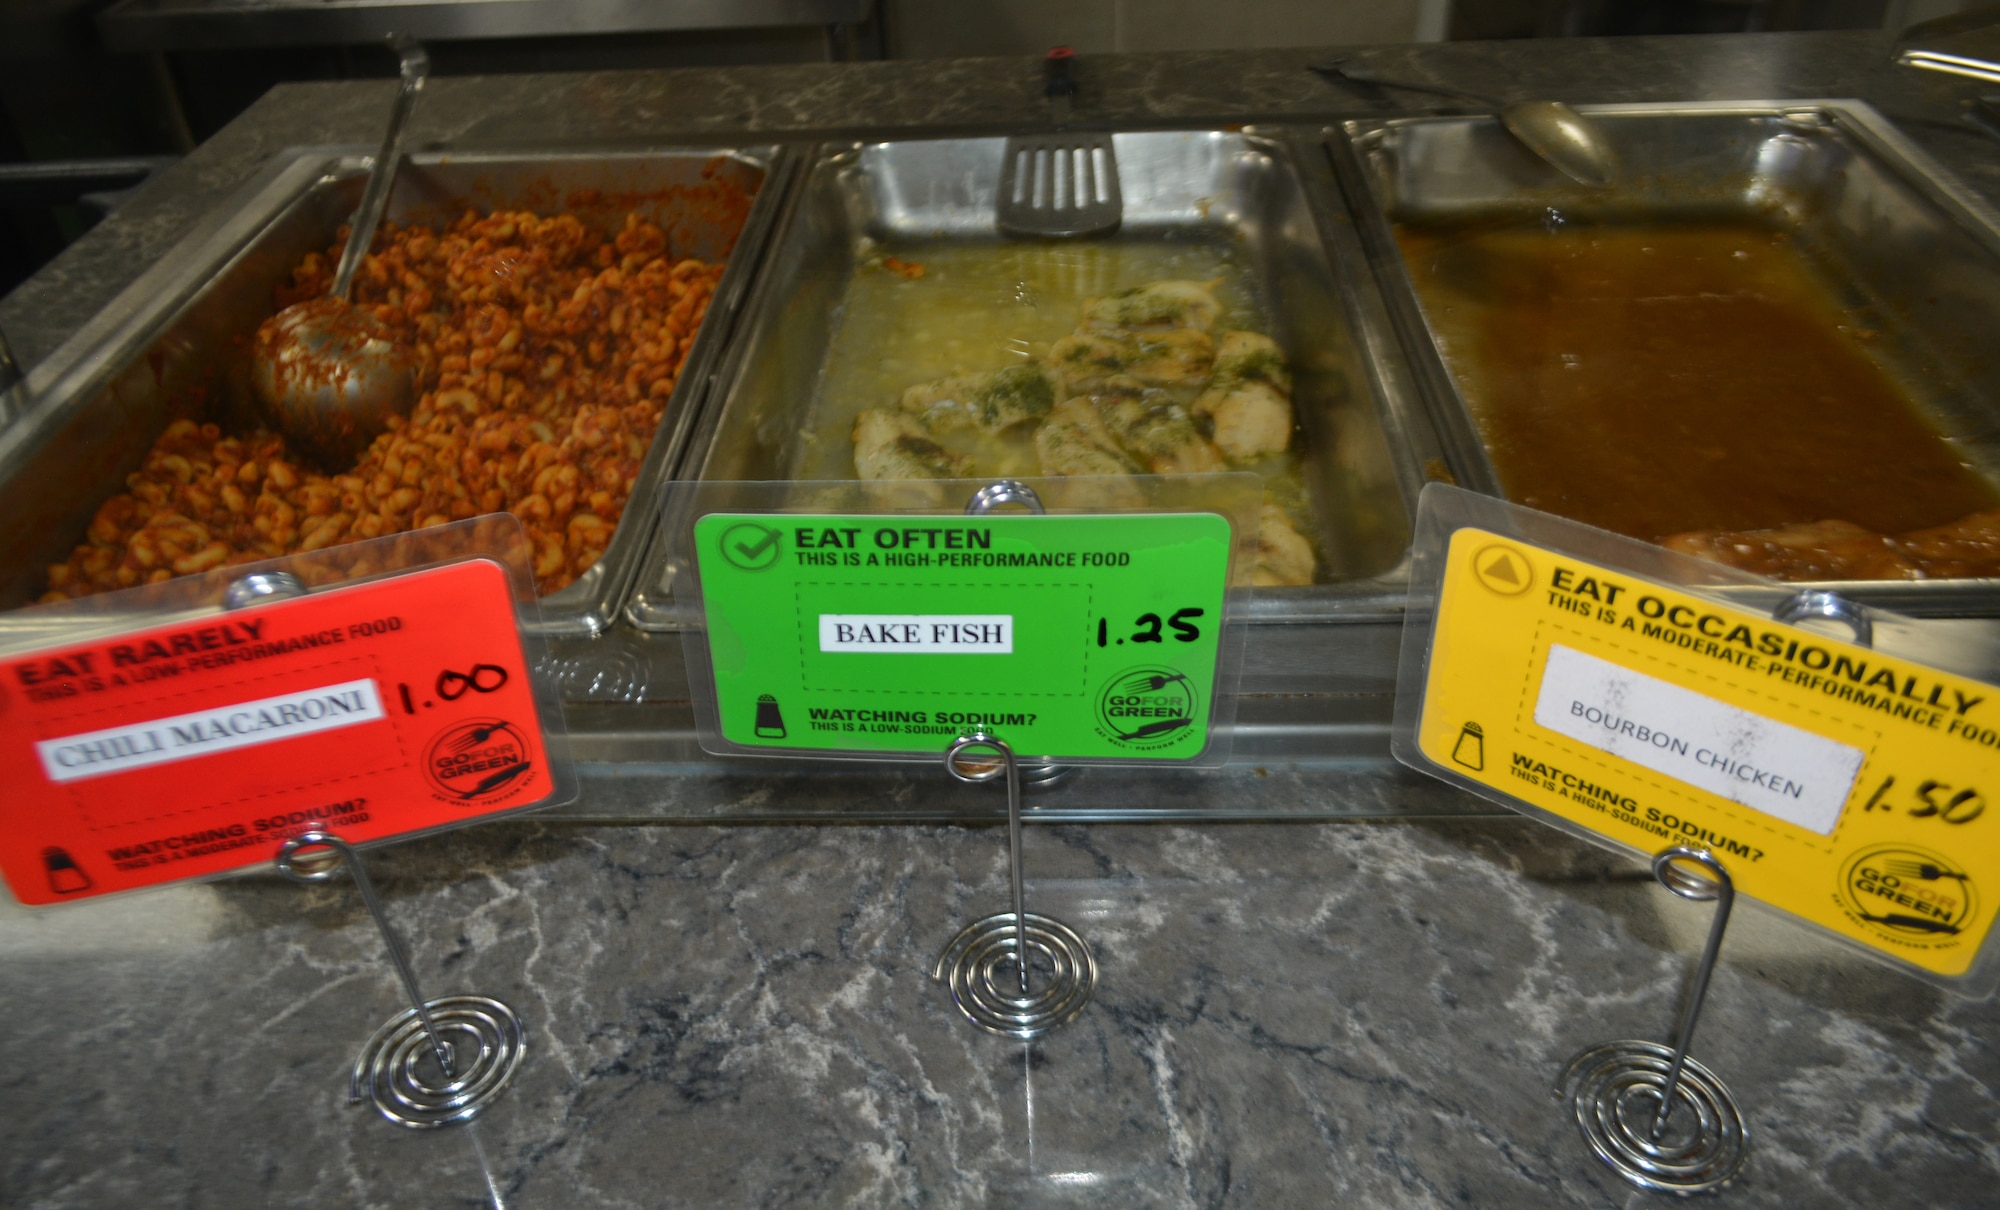 Menu items are displayed on color-coded placards as part of the "Go For Green" initiative to guide service members, retirees and civilians to healthier food choices at the Freedom Hall Dining Facility at Joint Base Andrews, Md., Oct. 4, 2022.